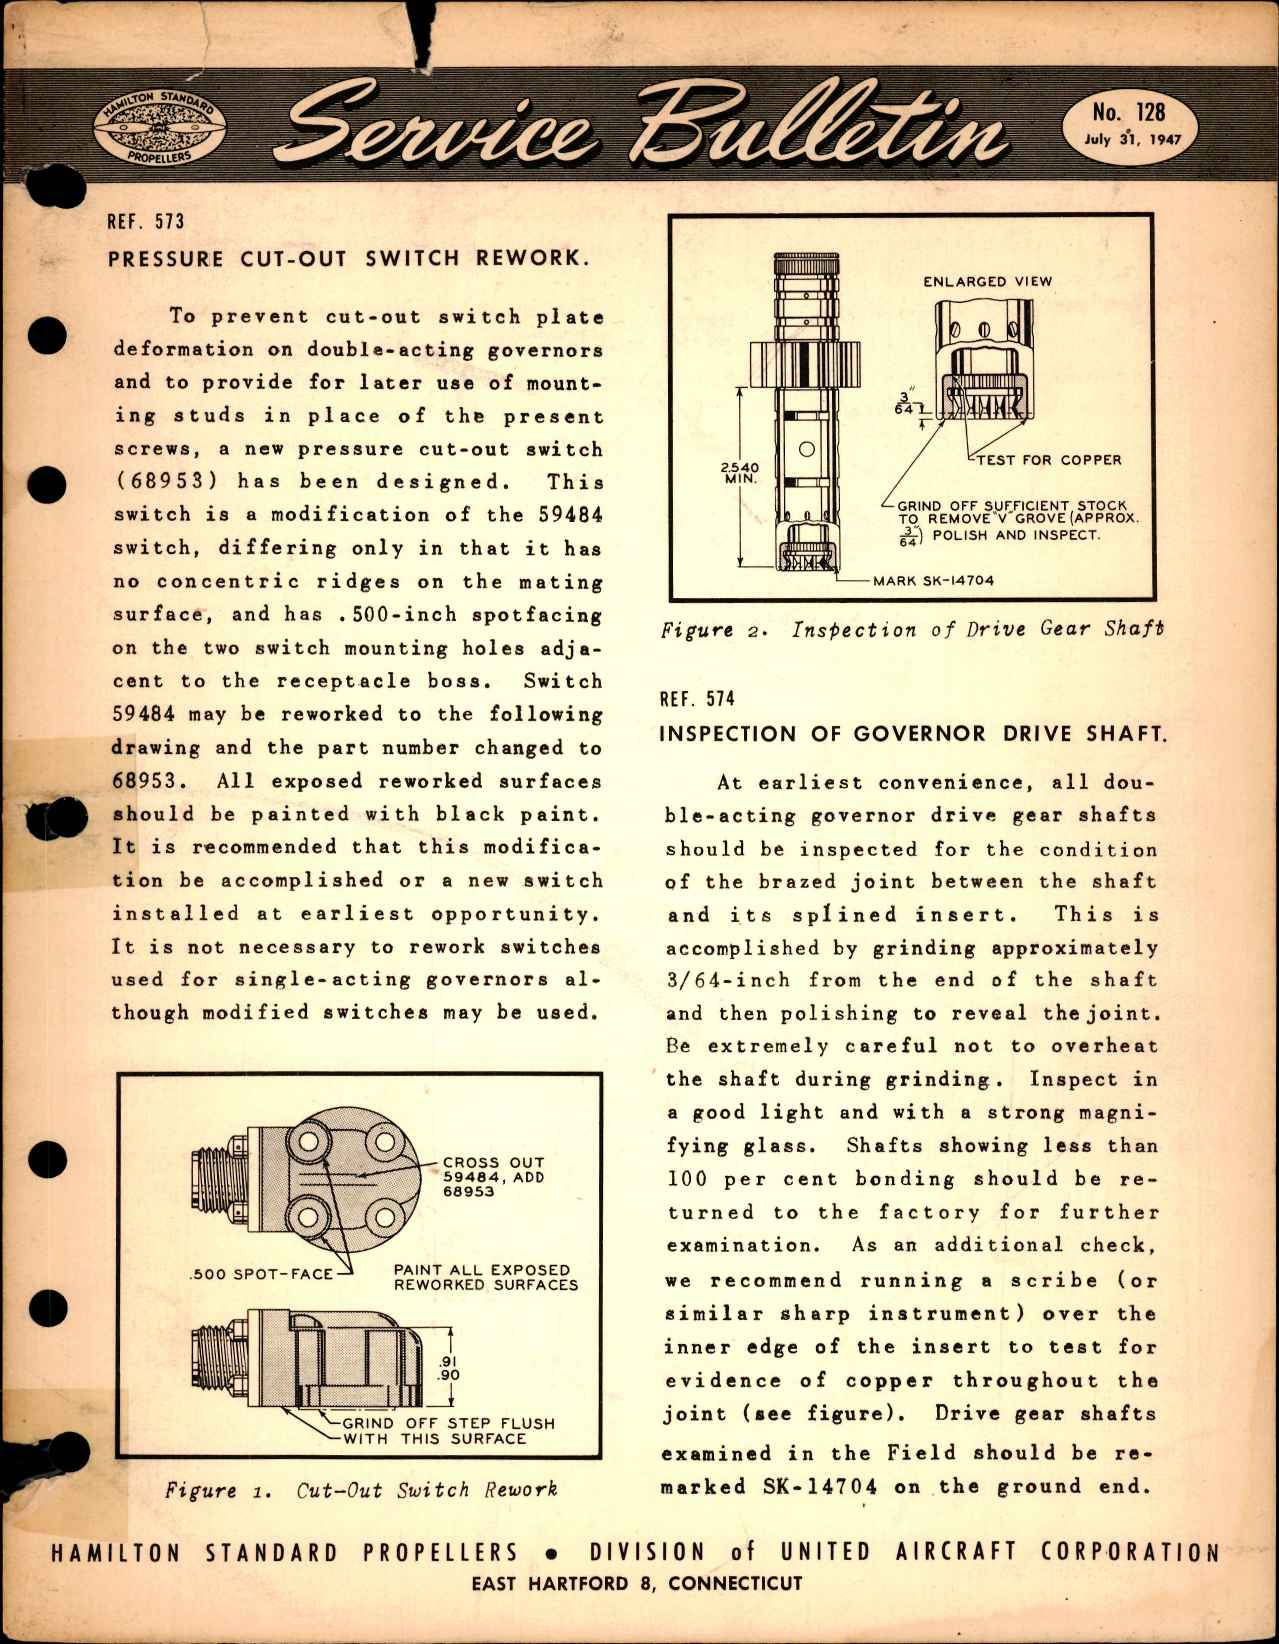 Sample page 1 from AirCorps Library document: Pressure Cut-Out Switch Rework, Ref 573